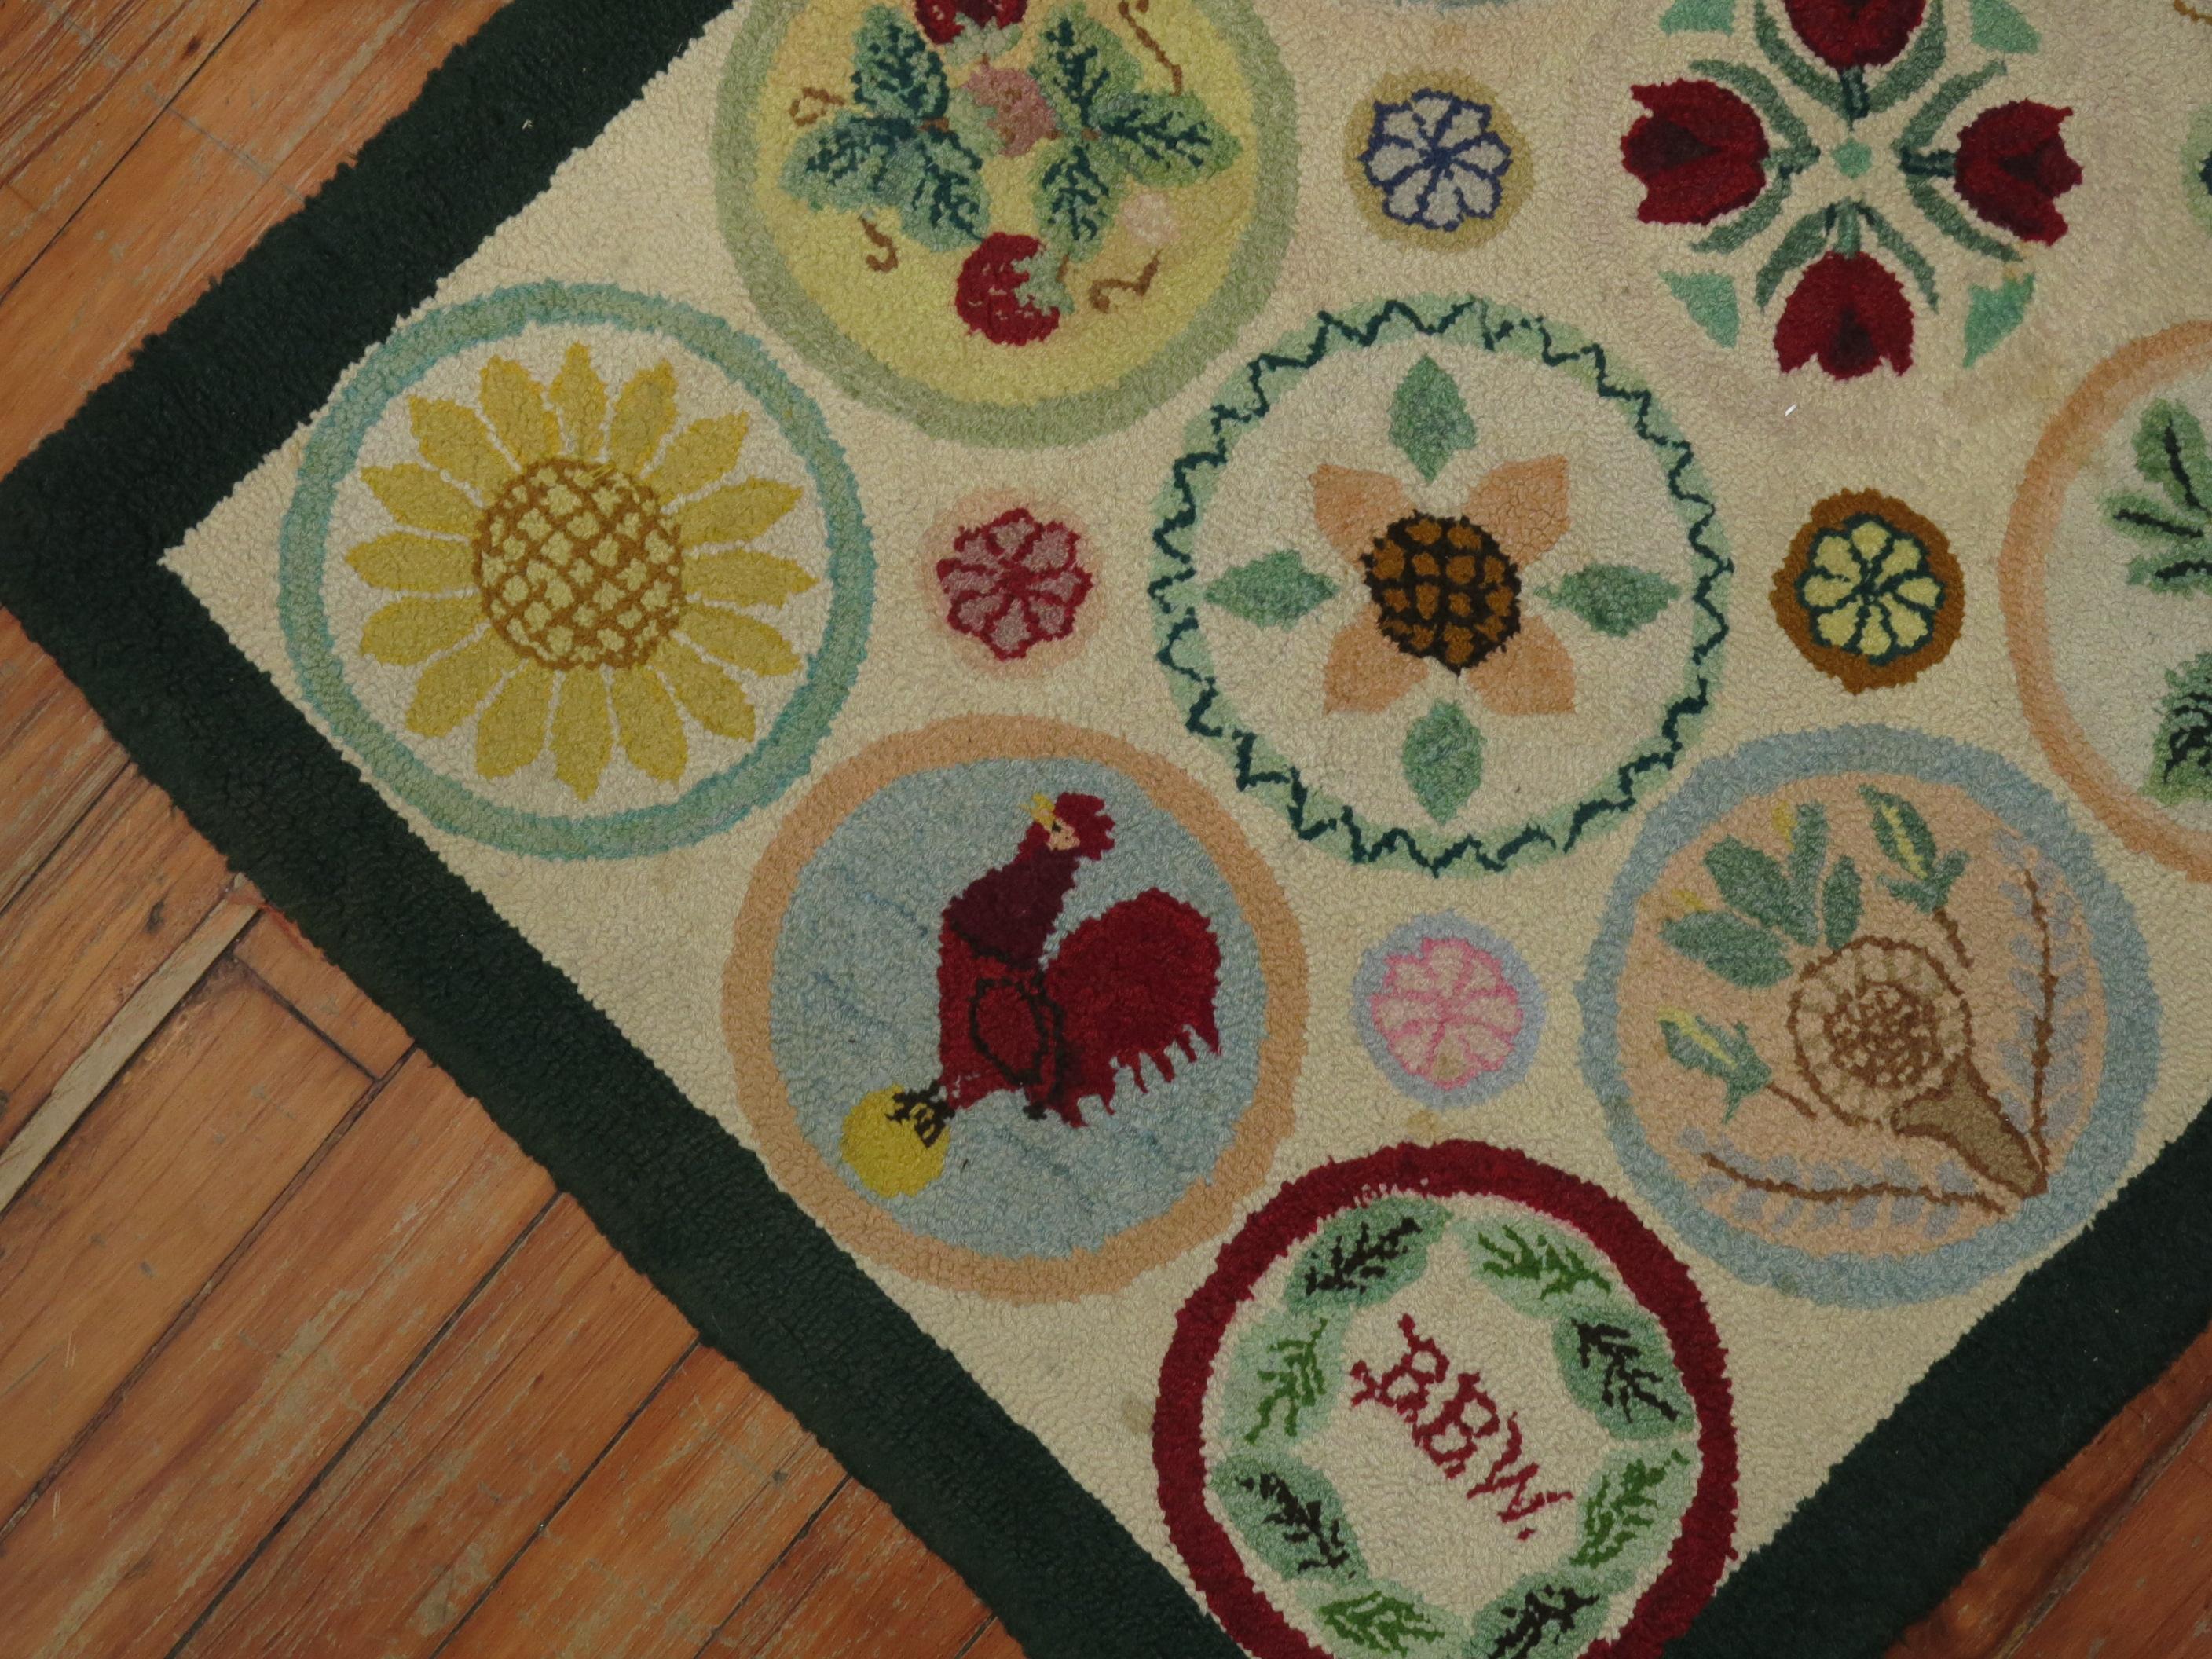 American hooked rug from the late 20th century. An array of fruits and on circular medallions. A rooster spotted on one of the medallions. Initials of weaver found on another medallion.